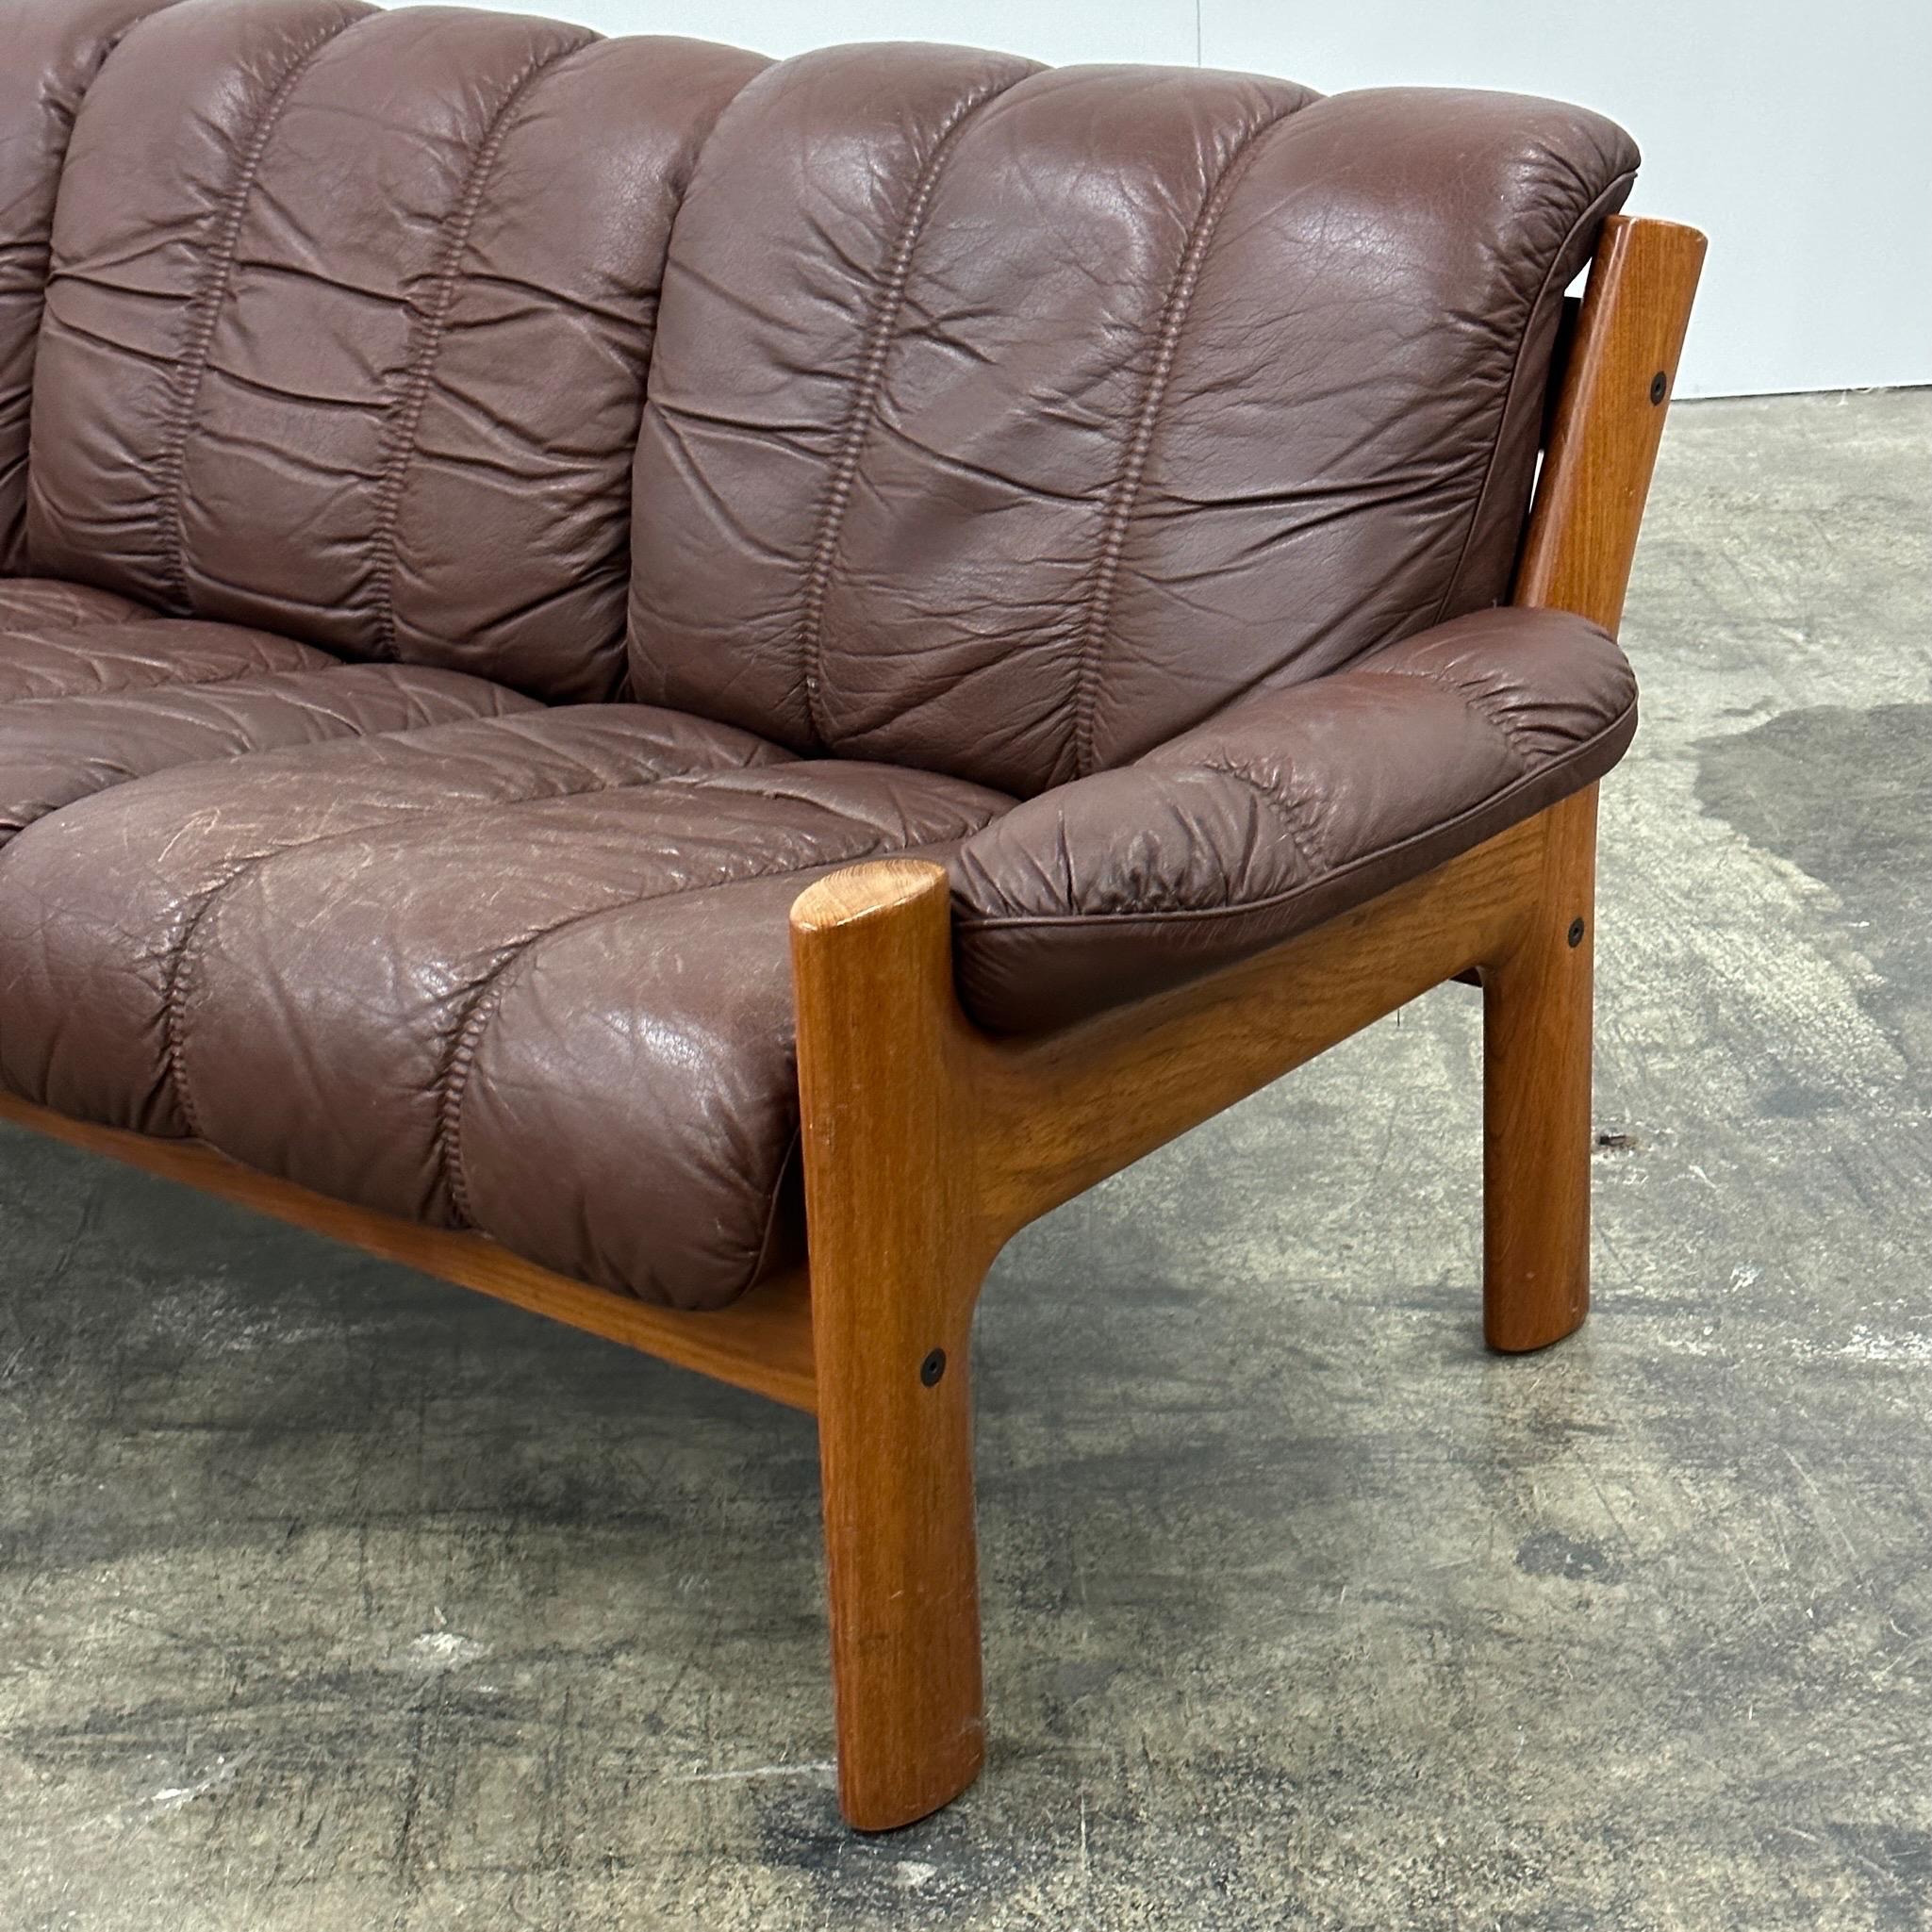 c. 1970s. Price is for the set. Danish leather with sculpted heavy wood frame. We have a matching pair of chairs available as well. Made in Norway. 